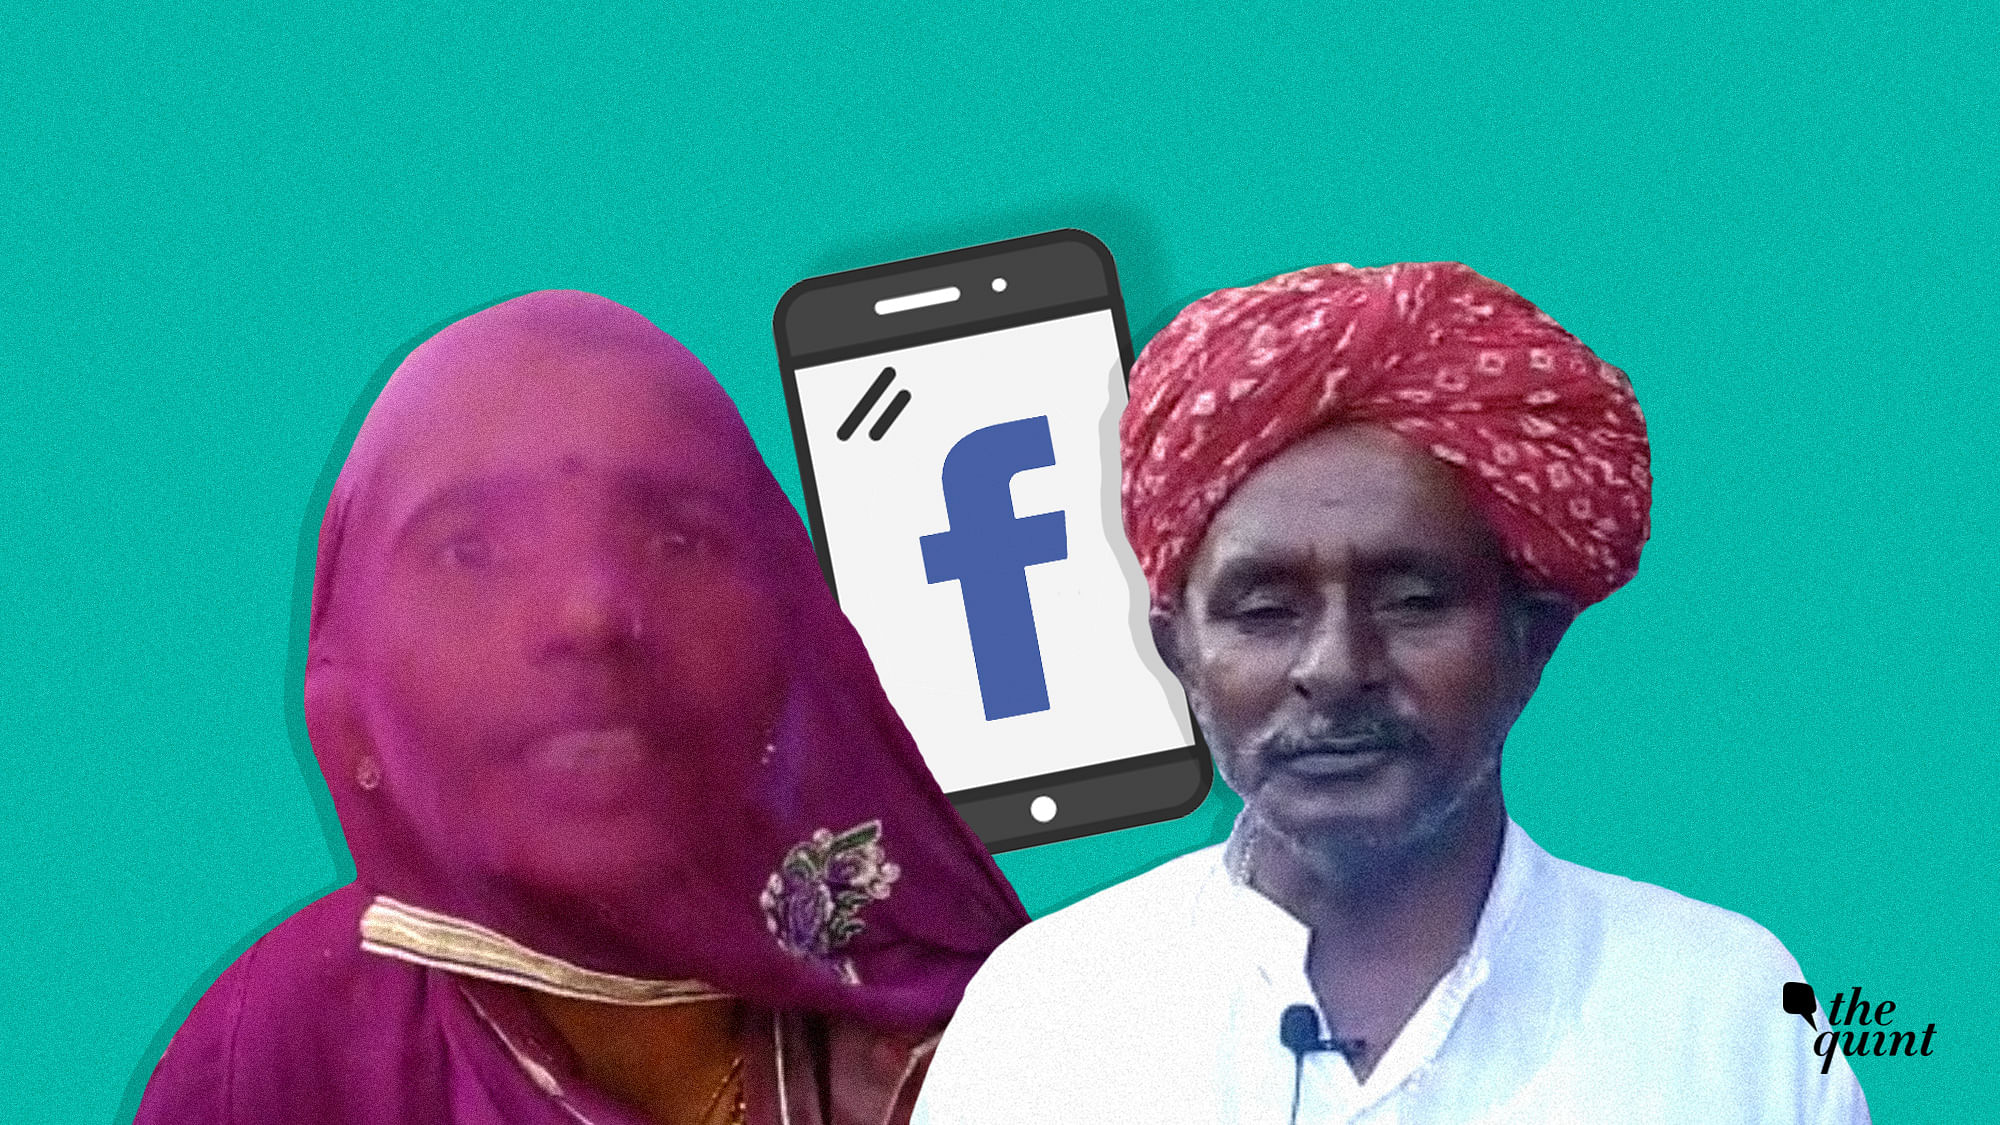 Dalits ostracised in Barmer: Use of casteist slur in a Facebook post has resulted in tension between two communities.